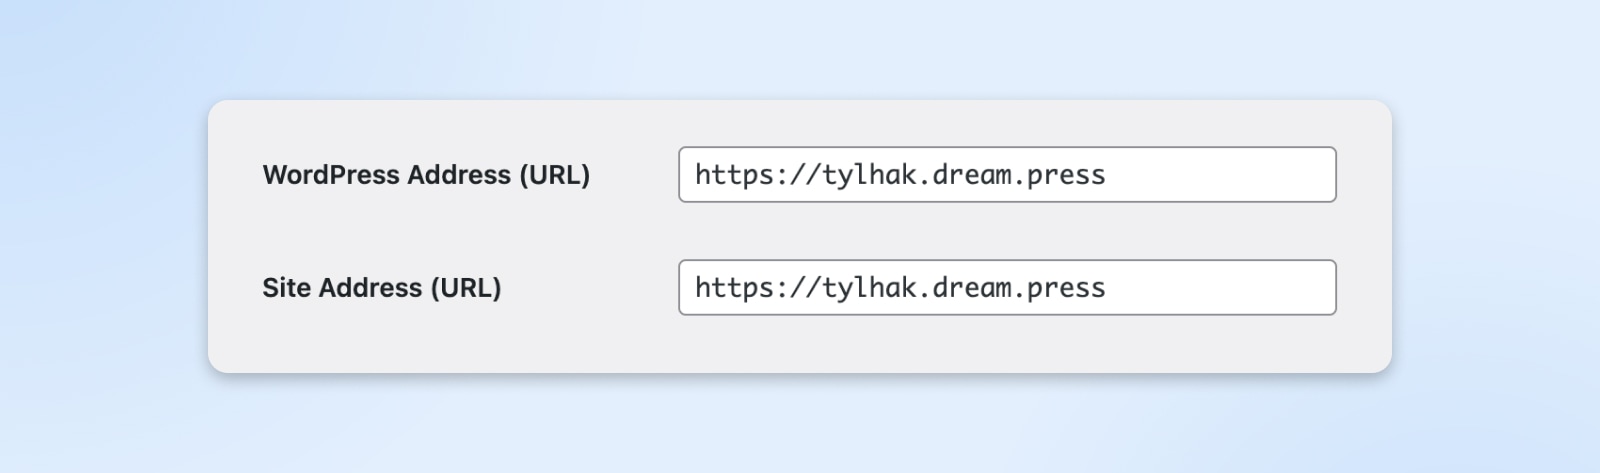 Close up of the WordPress Address and Site Address fields, both showing: https://tylhak.dream.press" 